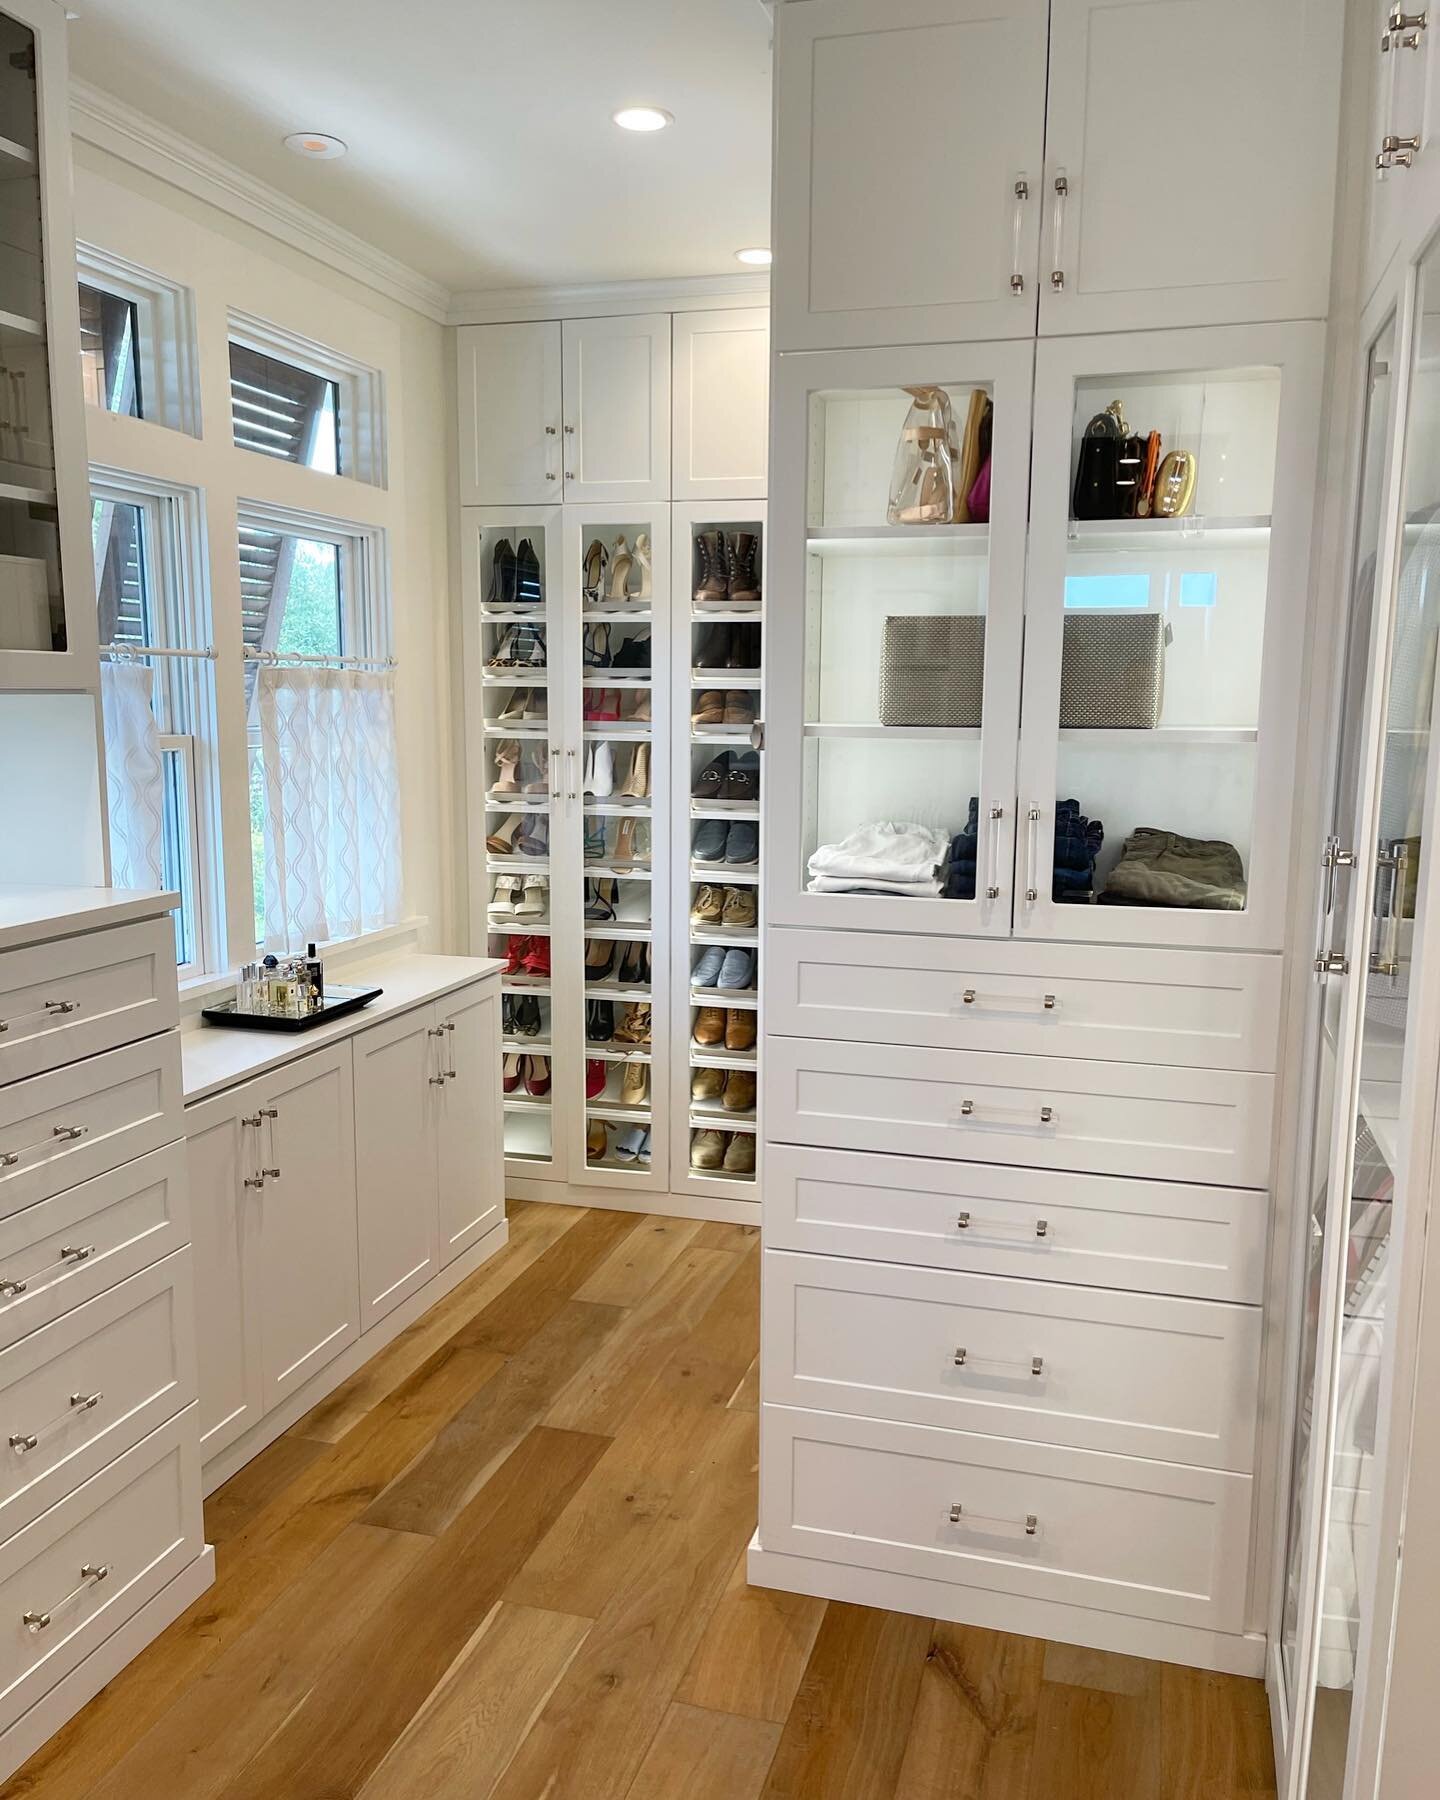 This was a dreamy one 🤍 ✨

Was so excited to get started- I forgot to take before pictures 🤦🏼&zwj;♀️

Loved working in this masterpiece designed by @inspiredclosets.chs !

#charlestonorganizer #organize #organization #organizing #home #declutter  